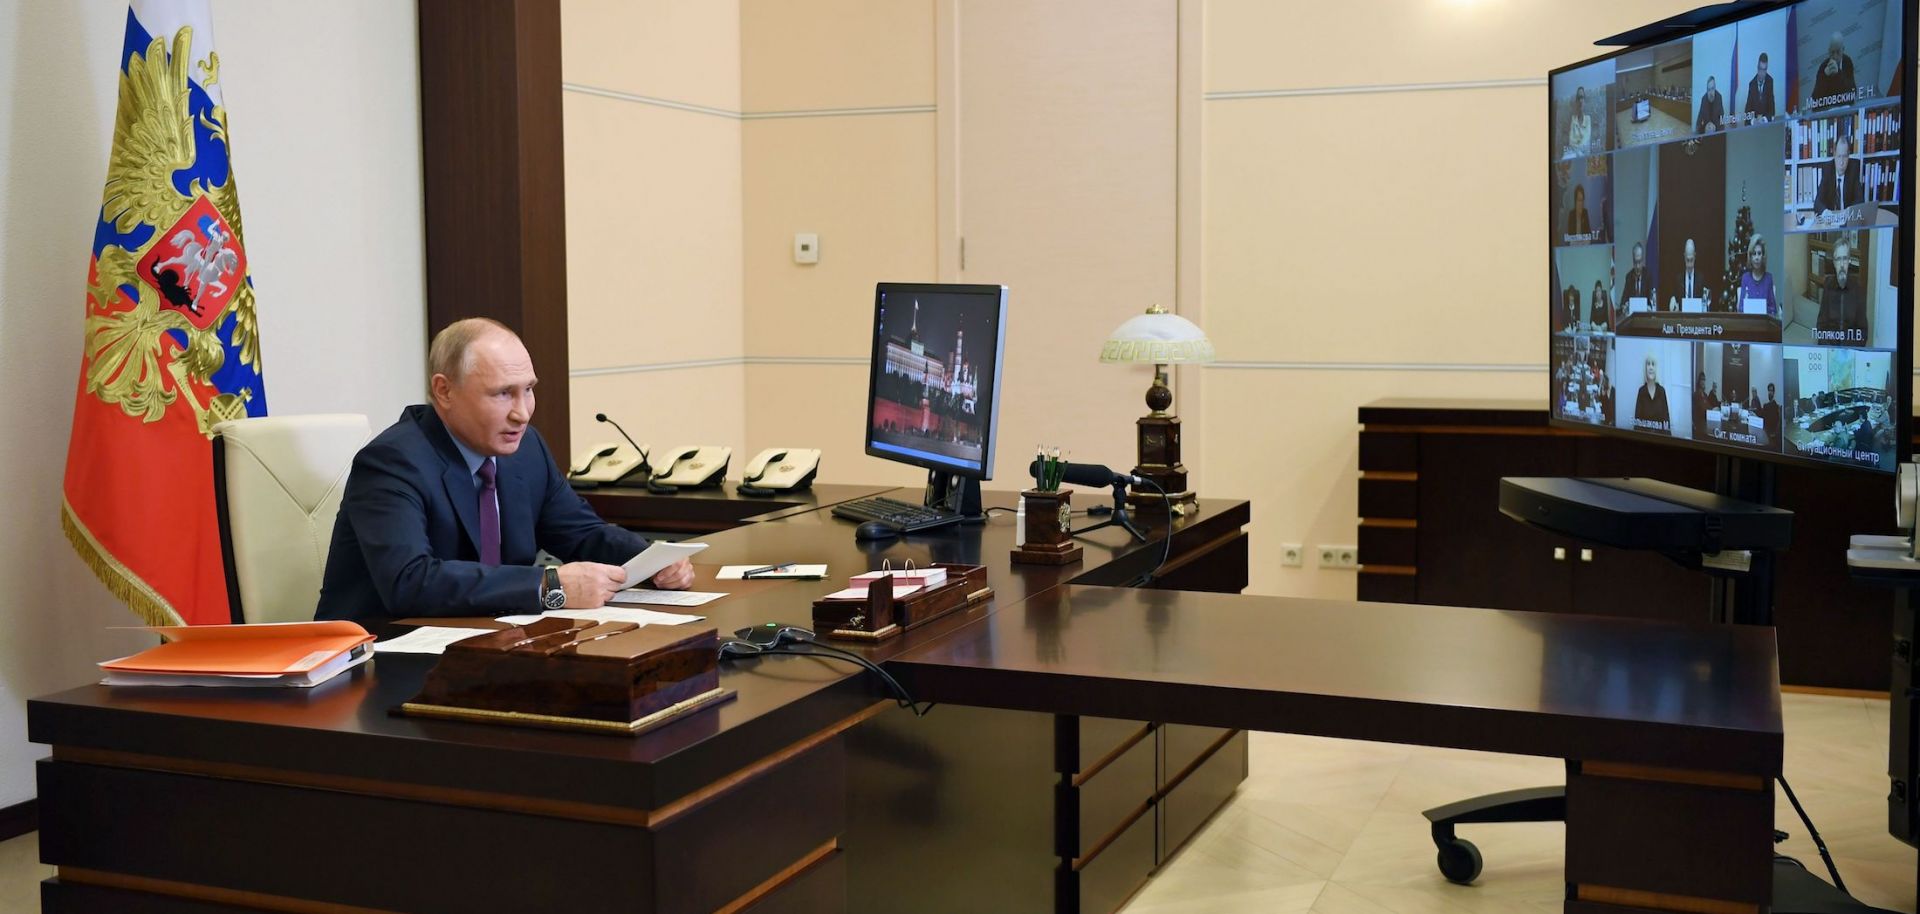 Russian President Vladimir Putin chairs a meeting of the Presidential Council for Civil Society and Human Rights via a video conference call Dec. 10, 2020, at the Novo-Ogaryovo state residence outside Moscow.